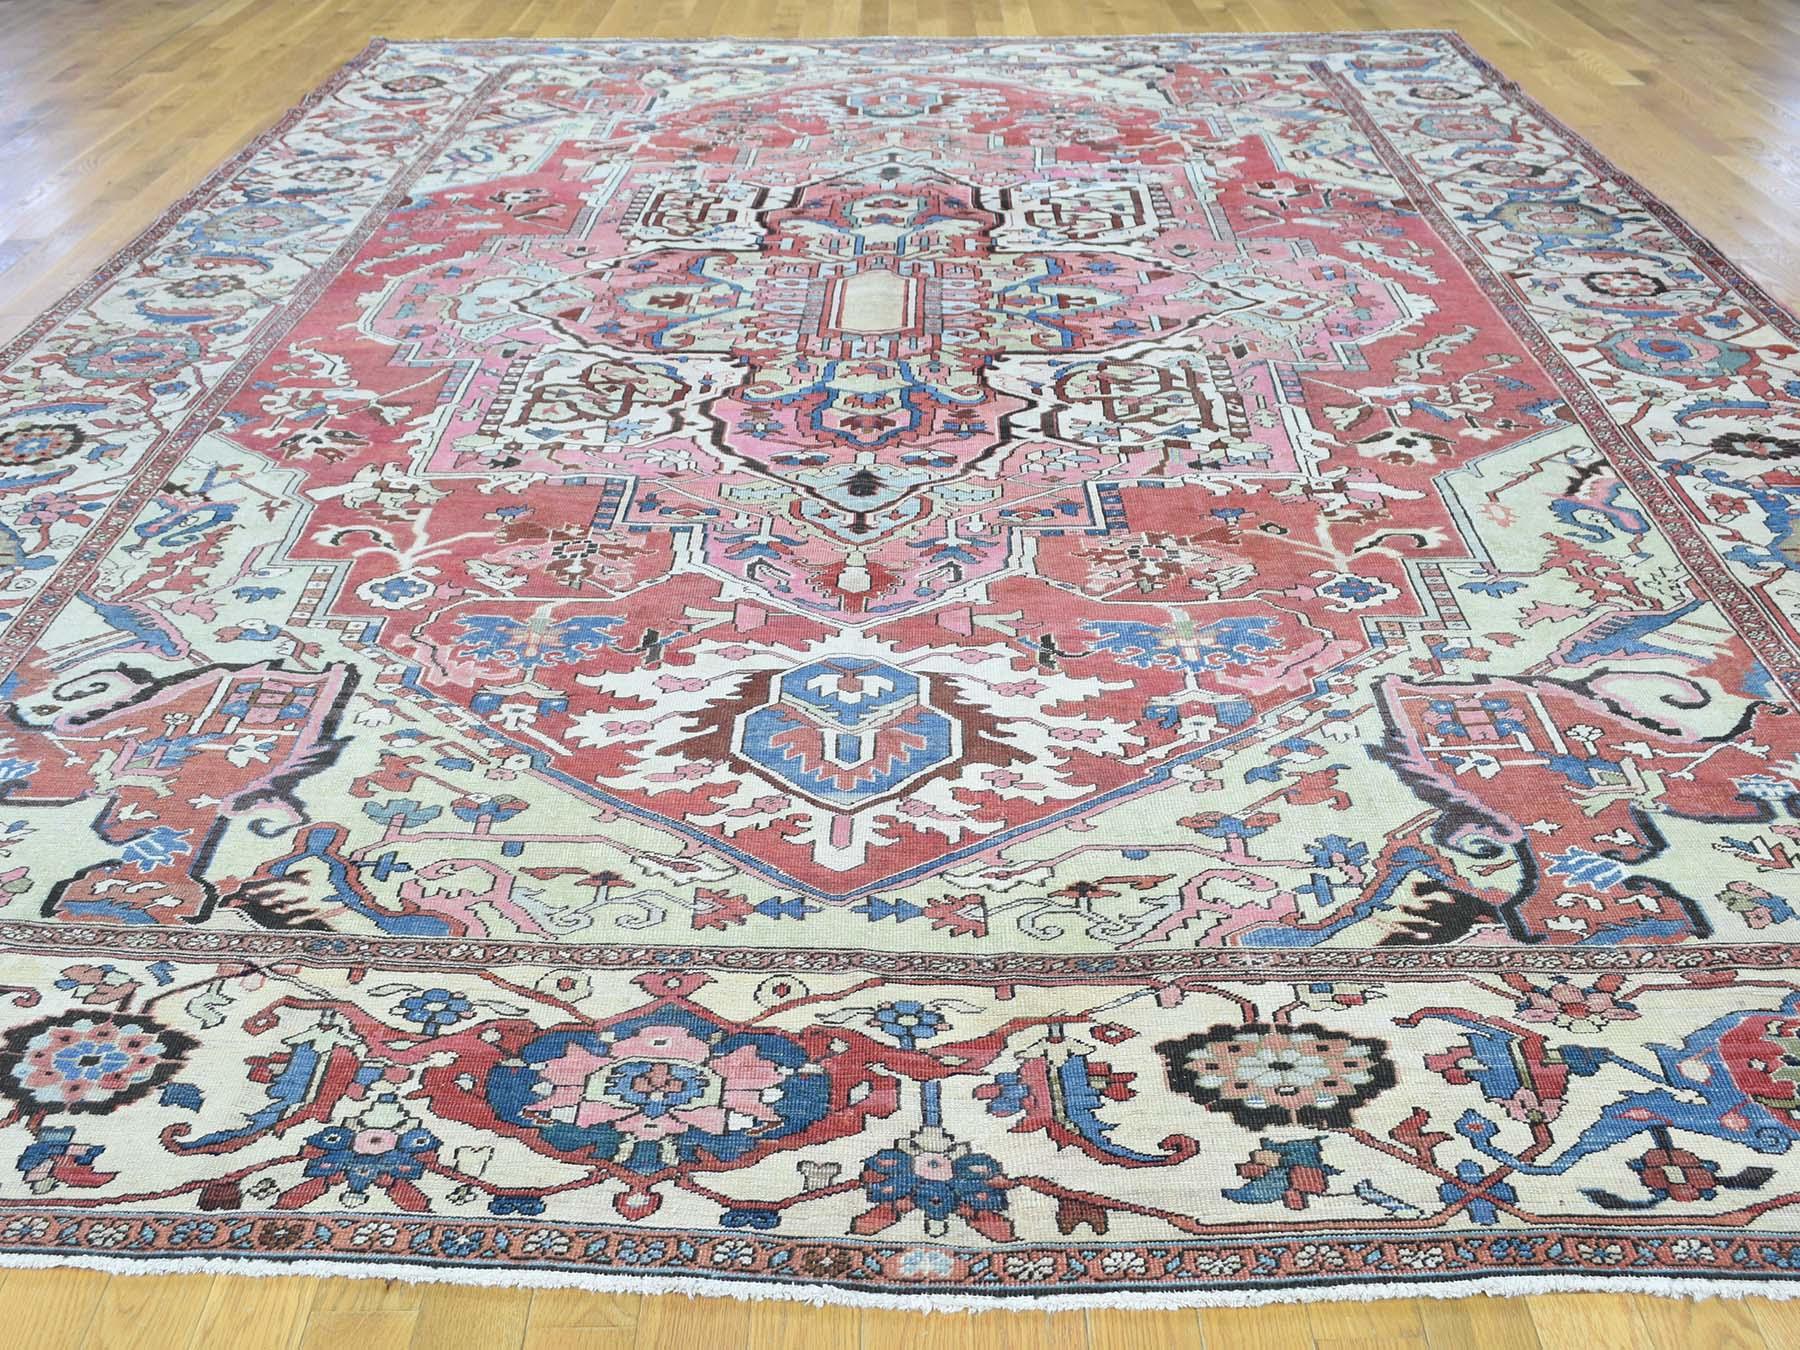 This is a genuine hand knotted oriental rug. It is not hand tufted or machine made rug. Our entire inventory is made of either hand knotted or handwoven rugs.

Bring life to your home with this admirable hand knotted carpet. This handcrafted